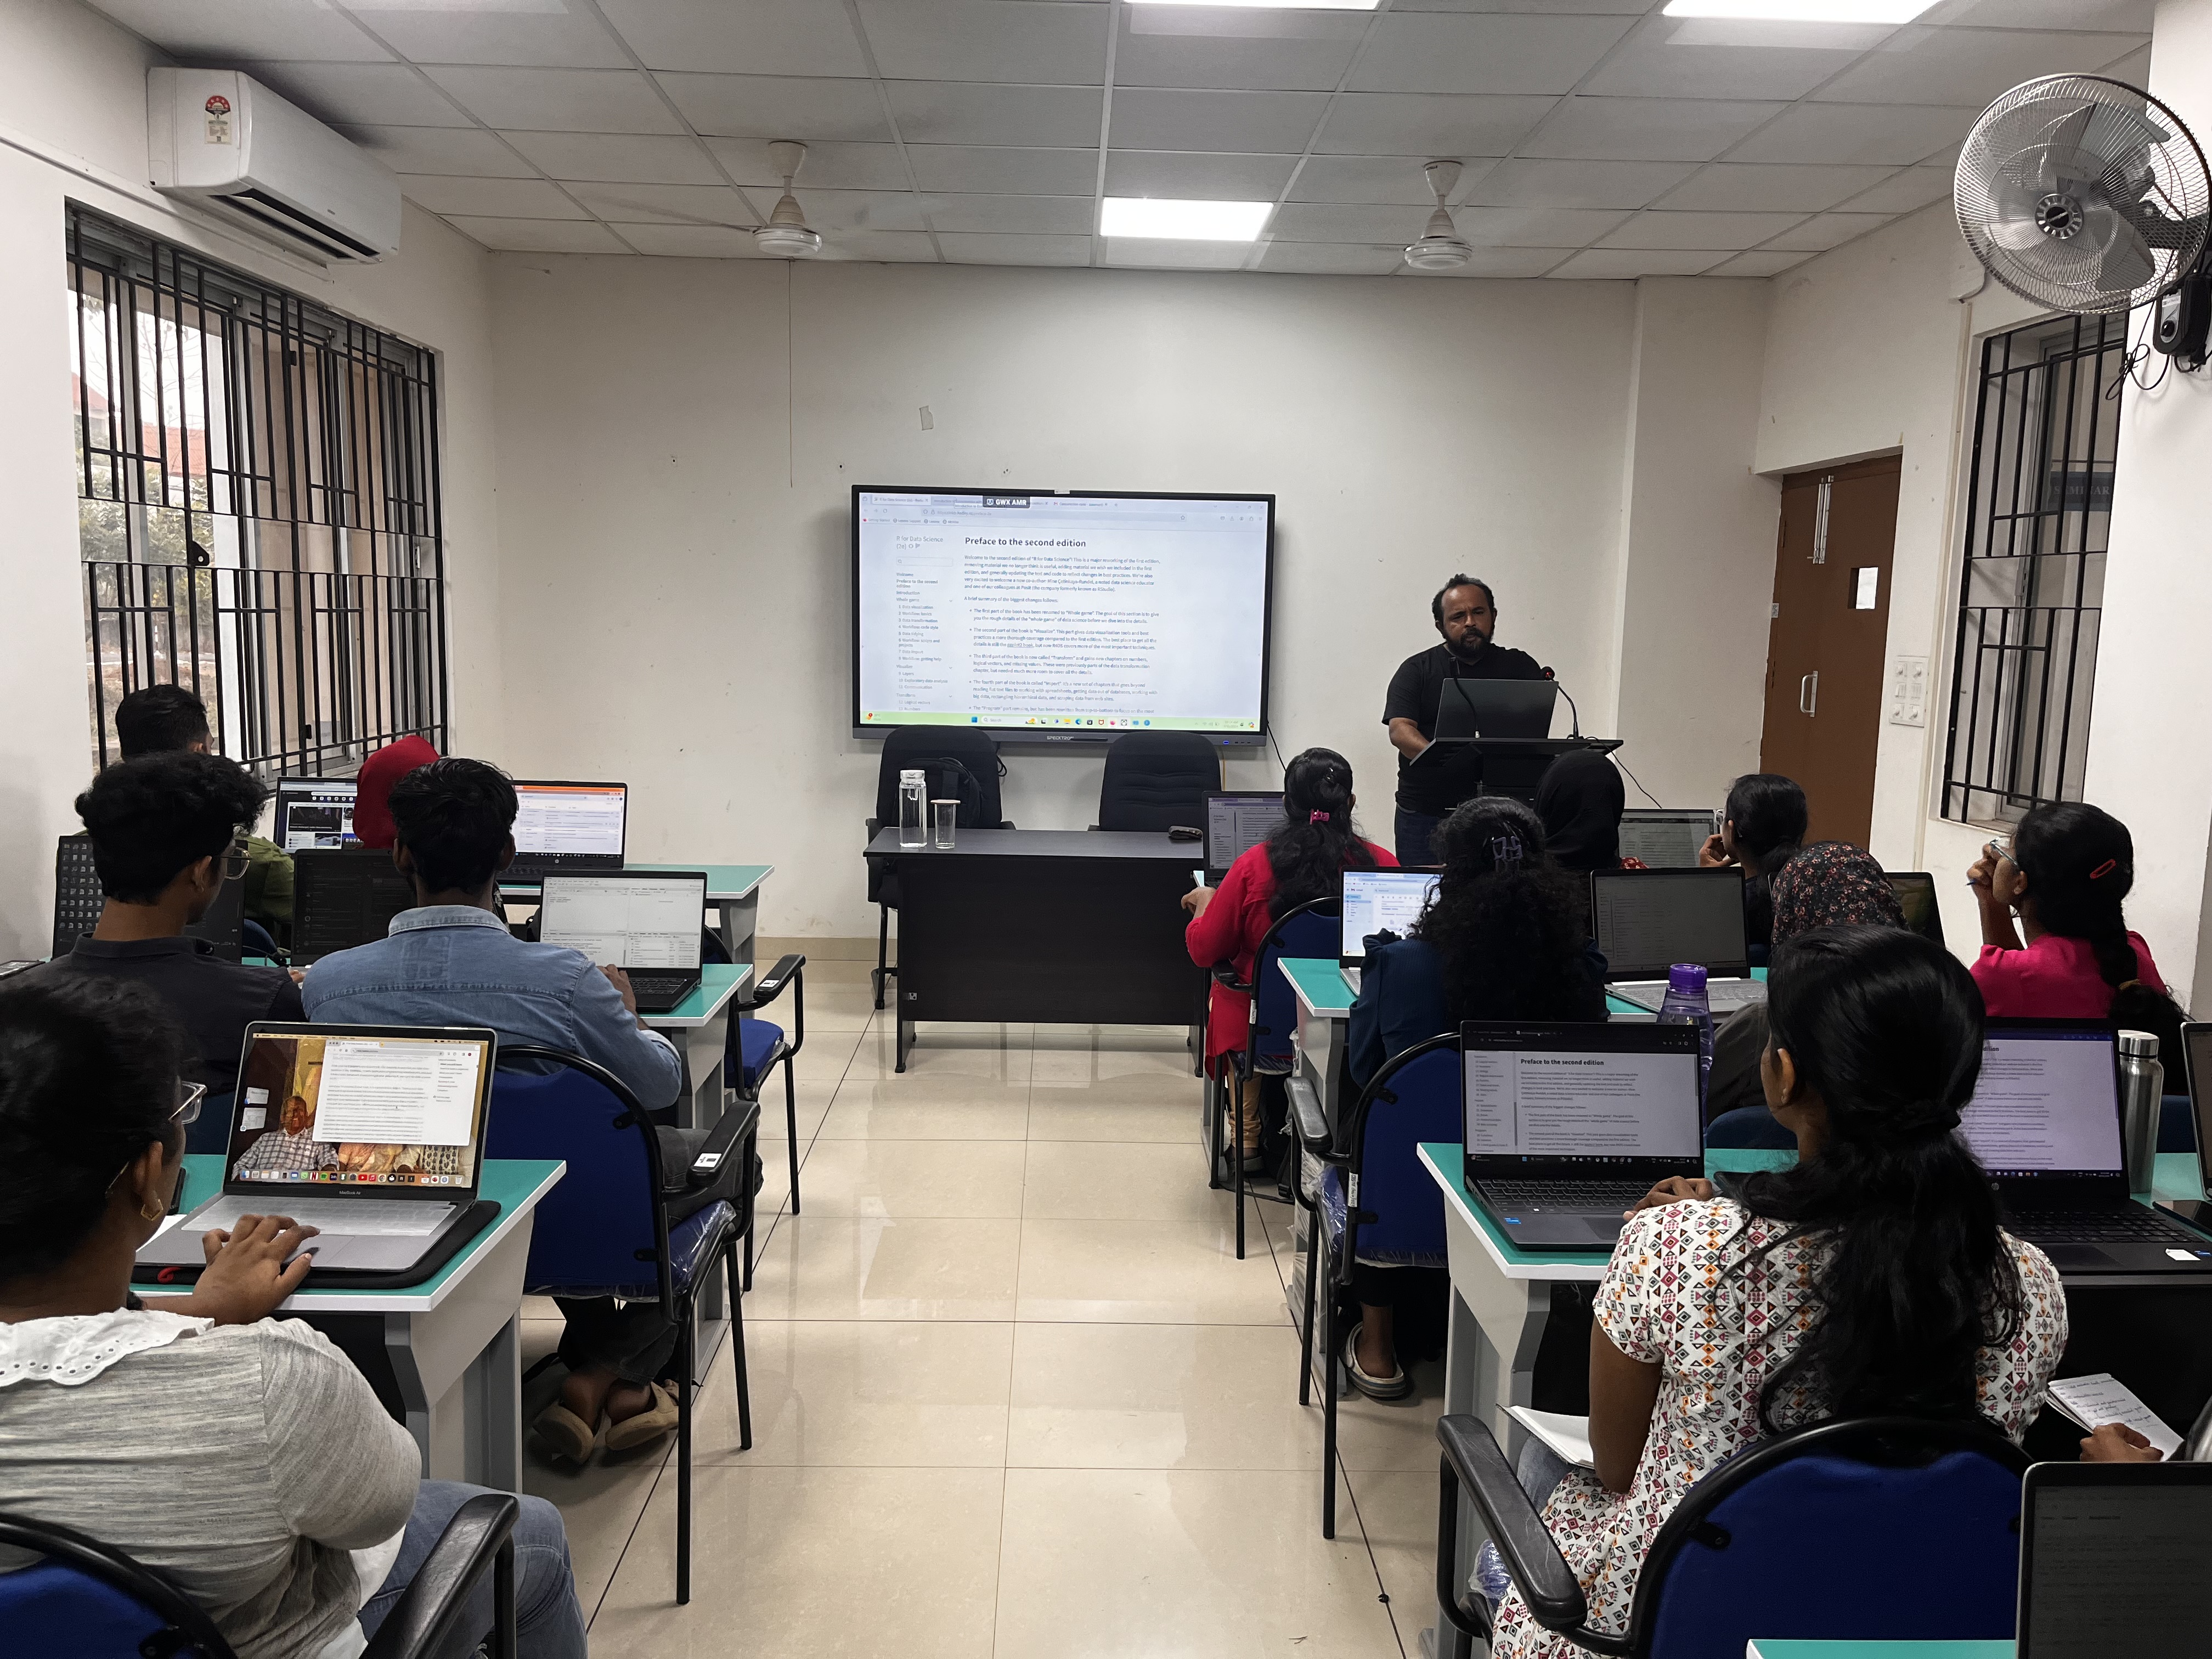 Workshop on ECONOMETRICS using R by Dr. Anoop S. Kumar, Assistant Professor, GIFT TVM on 16-17 March